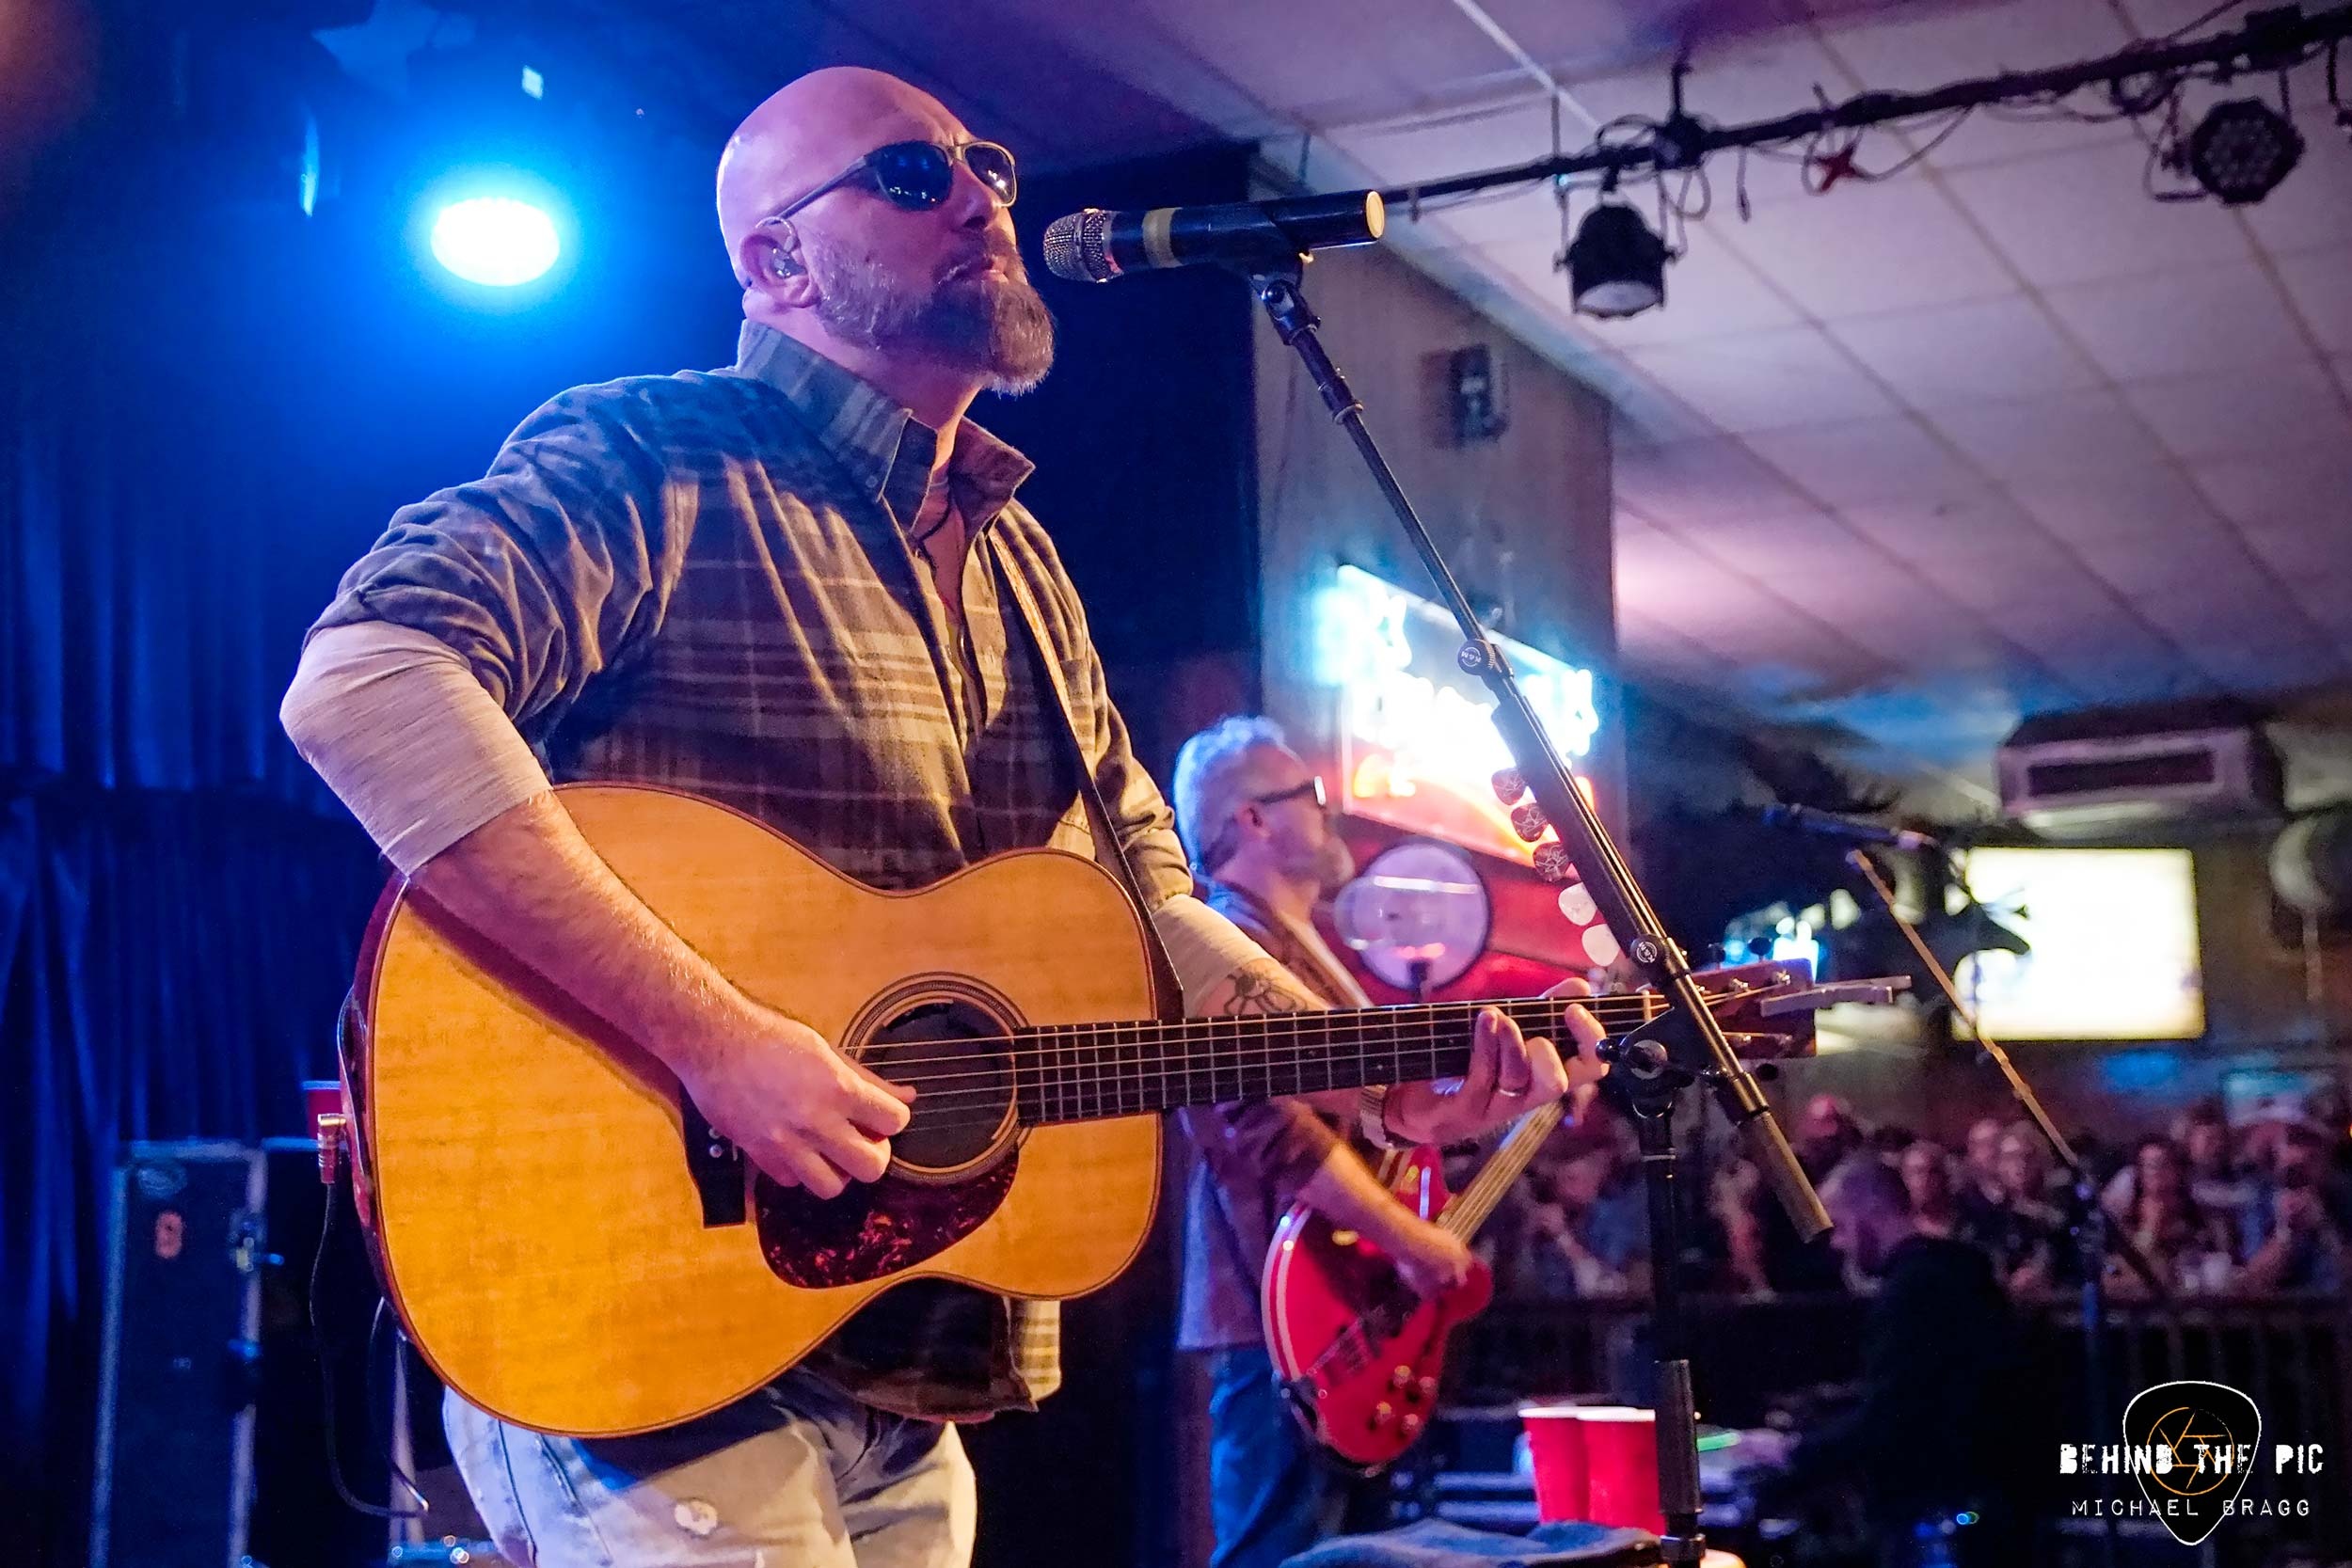 HD wallpaper, Desktop Hd Corey Smith Singer Background Photo, Corey Smith At The Blind Horse Saloon Behind The Pic 2500X1670